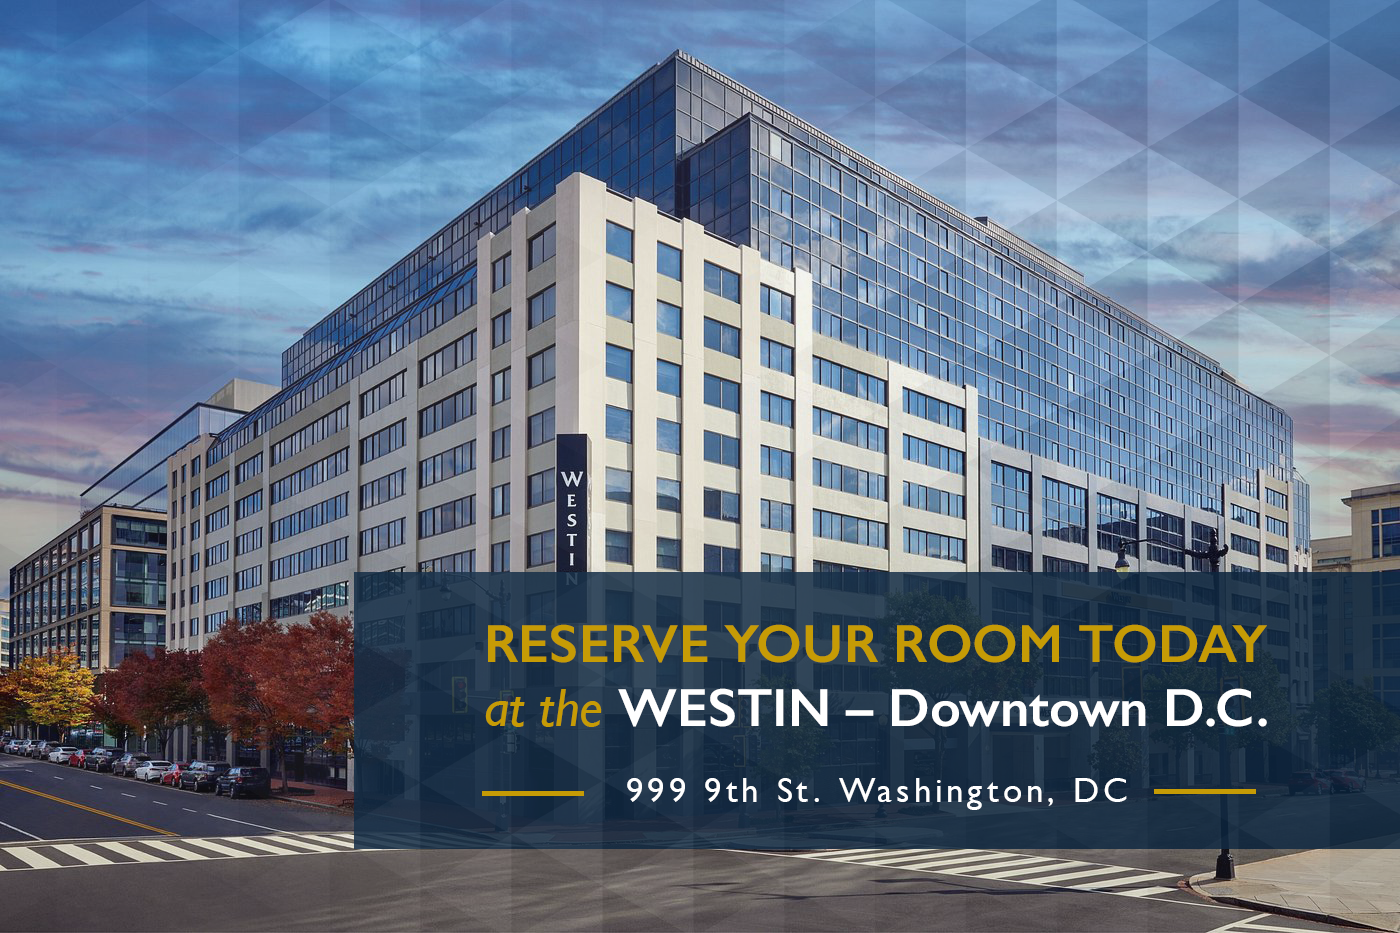 Reserve your room today at the Westin - Downtown DC - 999 9th St